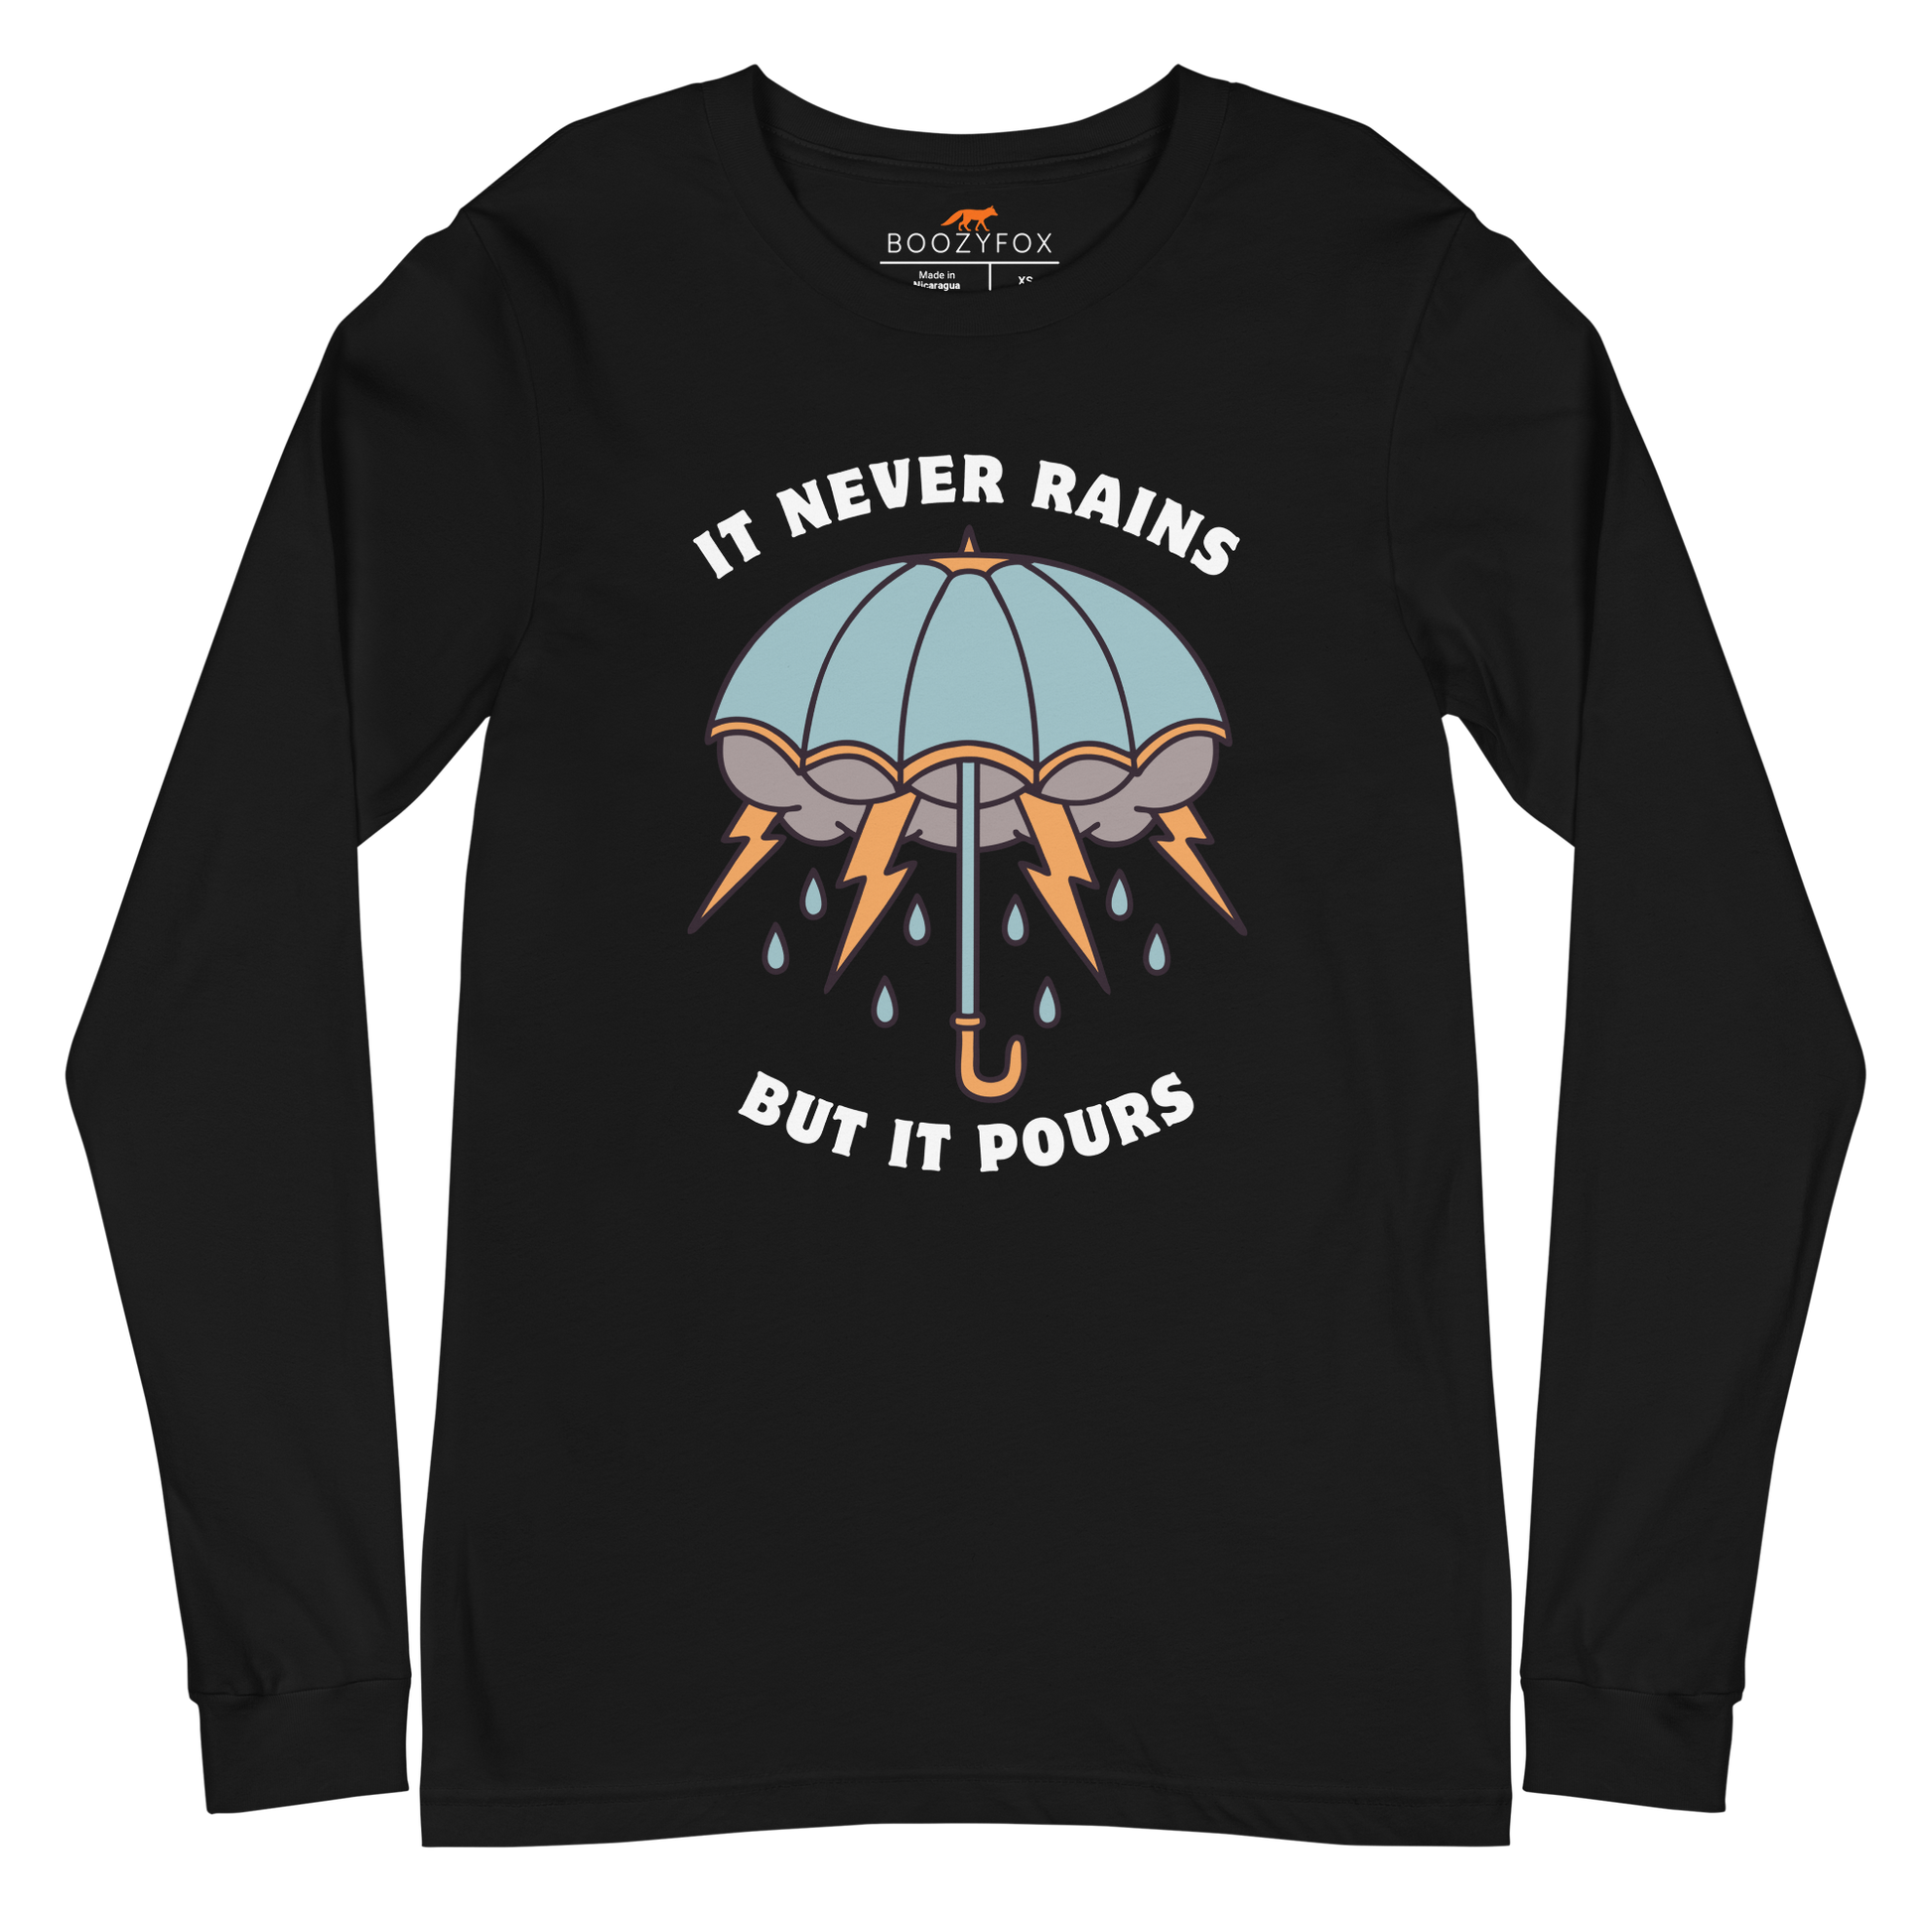 Black Umbrella Long Sleeve Tee featuring a unique It Never Rains But It Pours graphic on the chest - Cool Tattoo-Inspired Umbrella Long Sleeve Graphic Tees - Boozy Fox